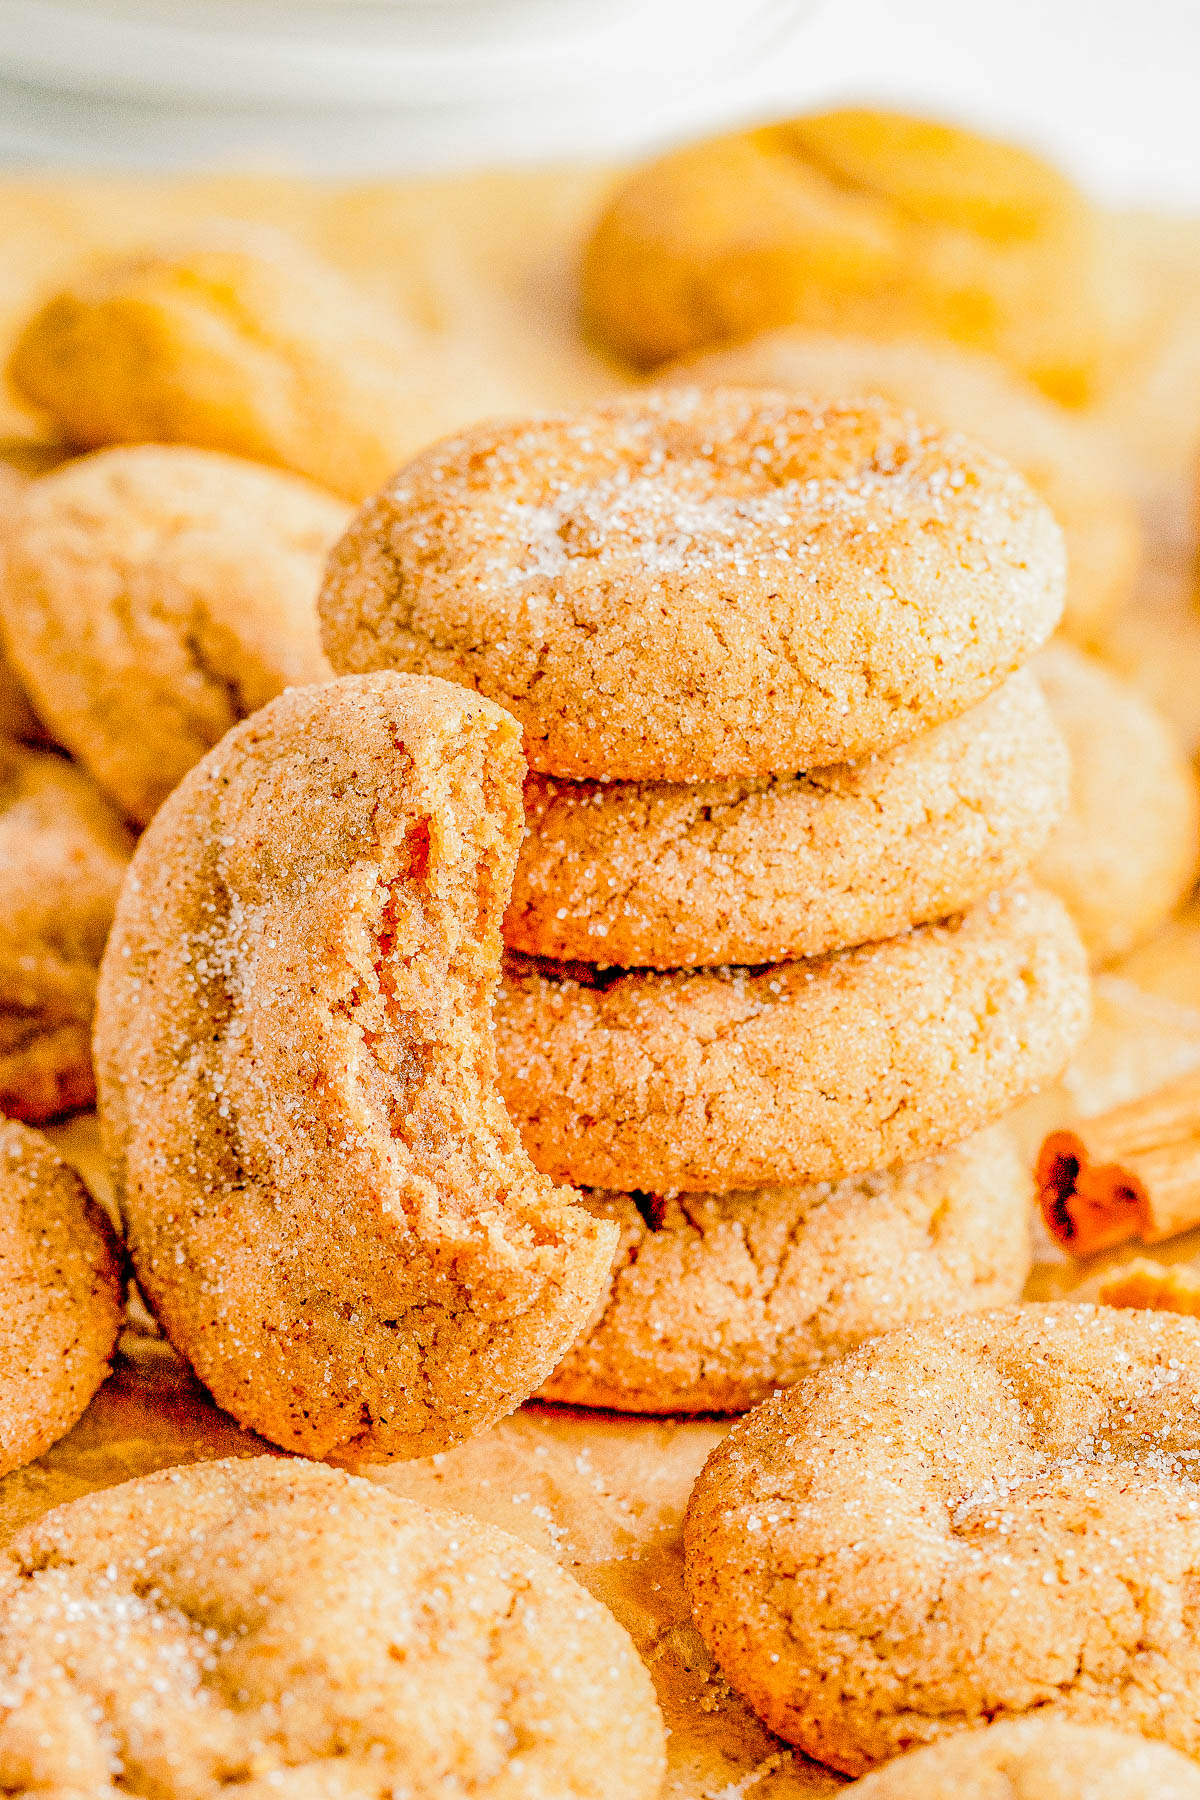 Soft and Chewy Pumpkin Snickerdoodles — Soft and pillowy in the middle, chewy around the edges, and ever so slightly crisp on the bottom! Classic snickerdoodles get a makeover with the addition of pumpkin puree and pumpkin pie spices! So EASY and the dough can be made in advance, and perfect for all those COZY fall vibes!